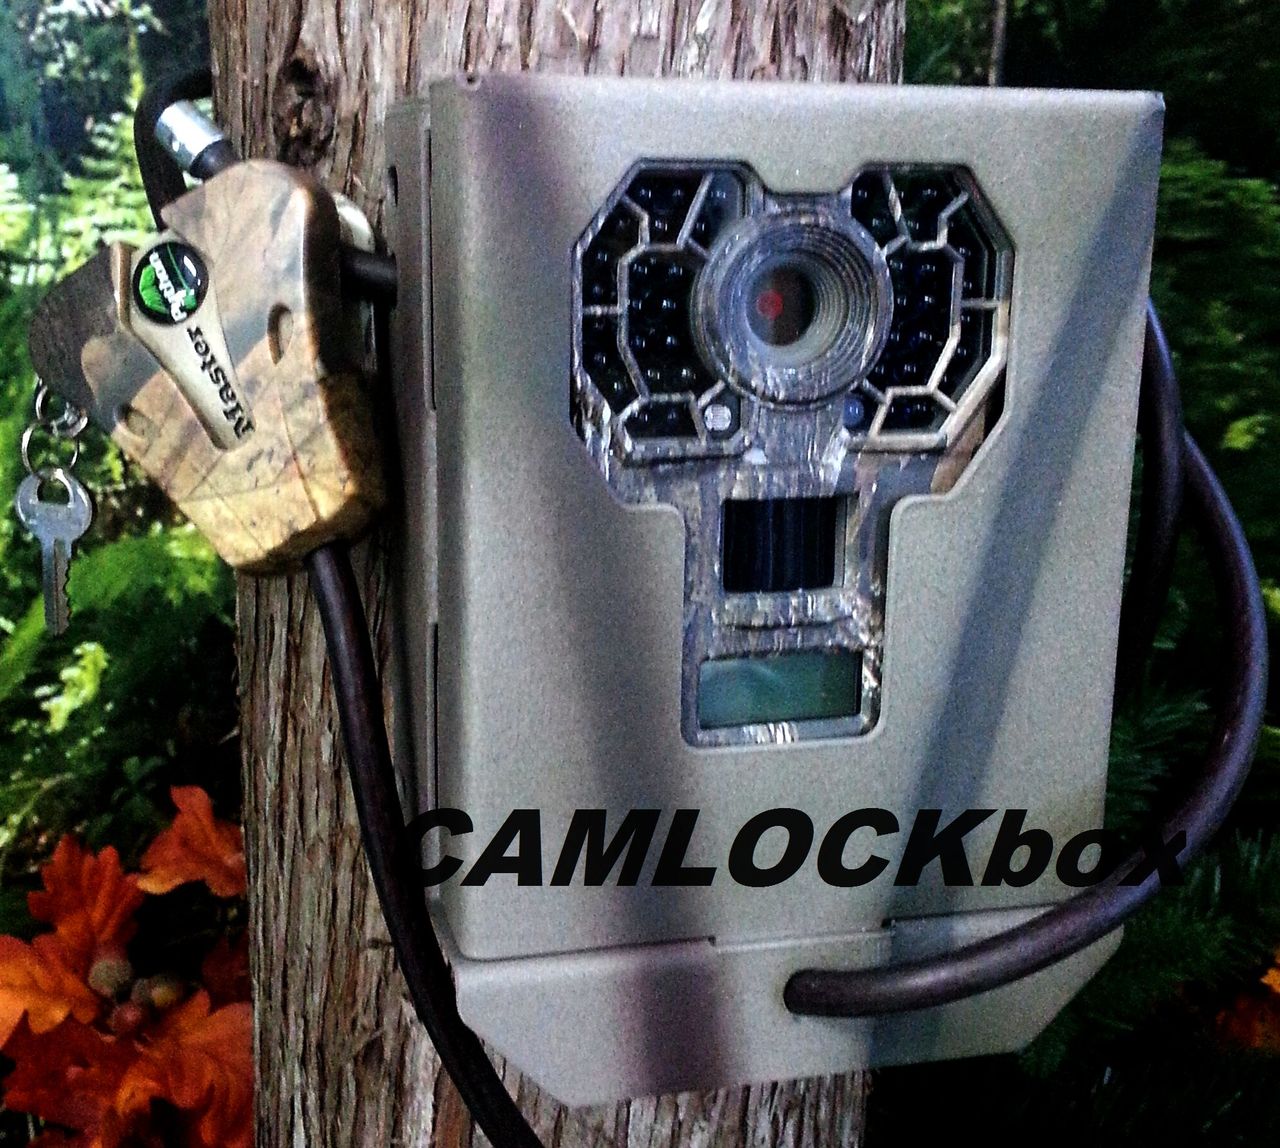 1003574 Stealth Cam Security/Bear Box for GX Series